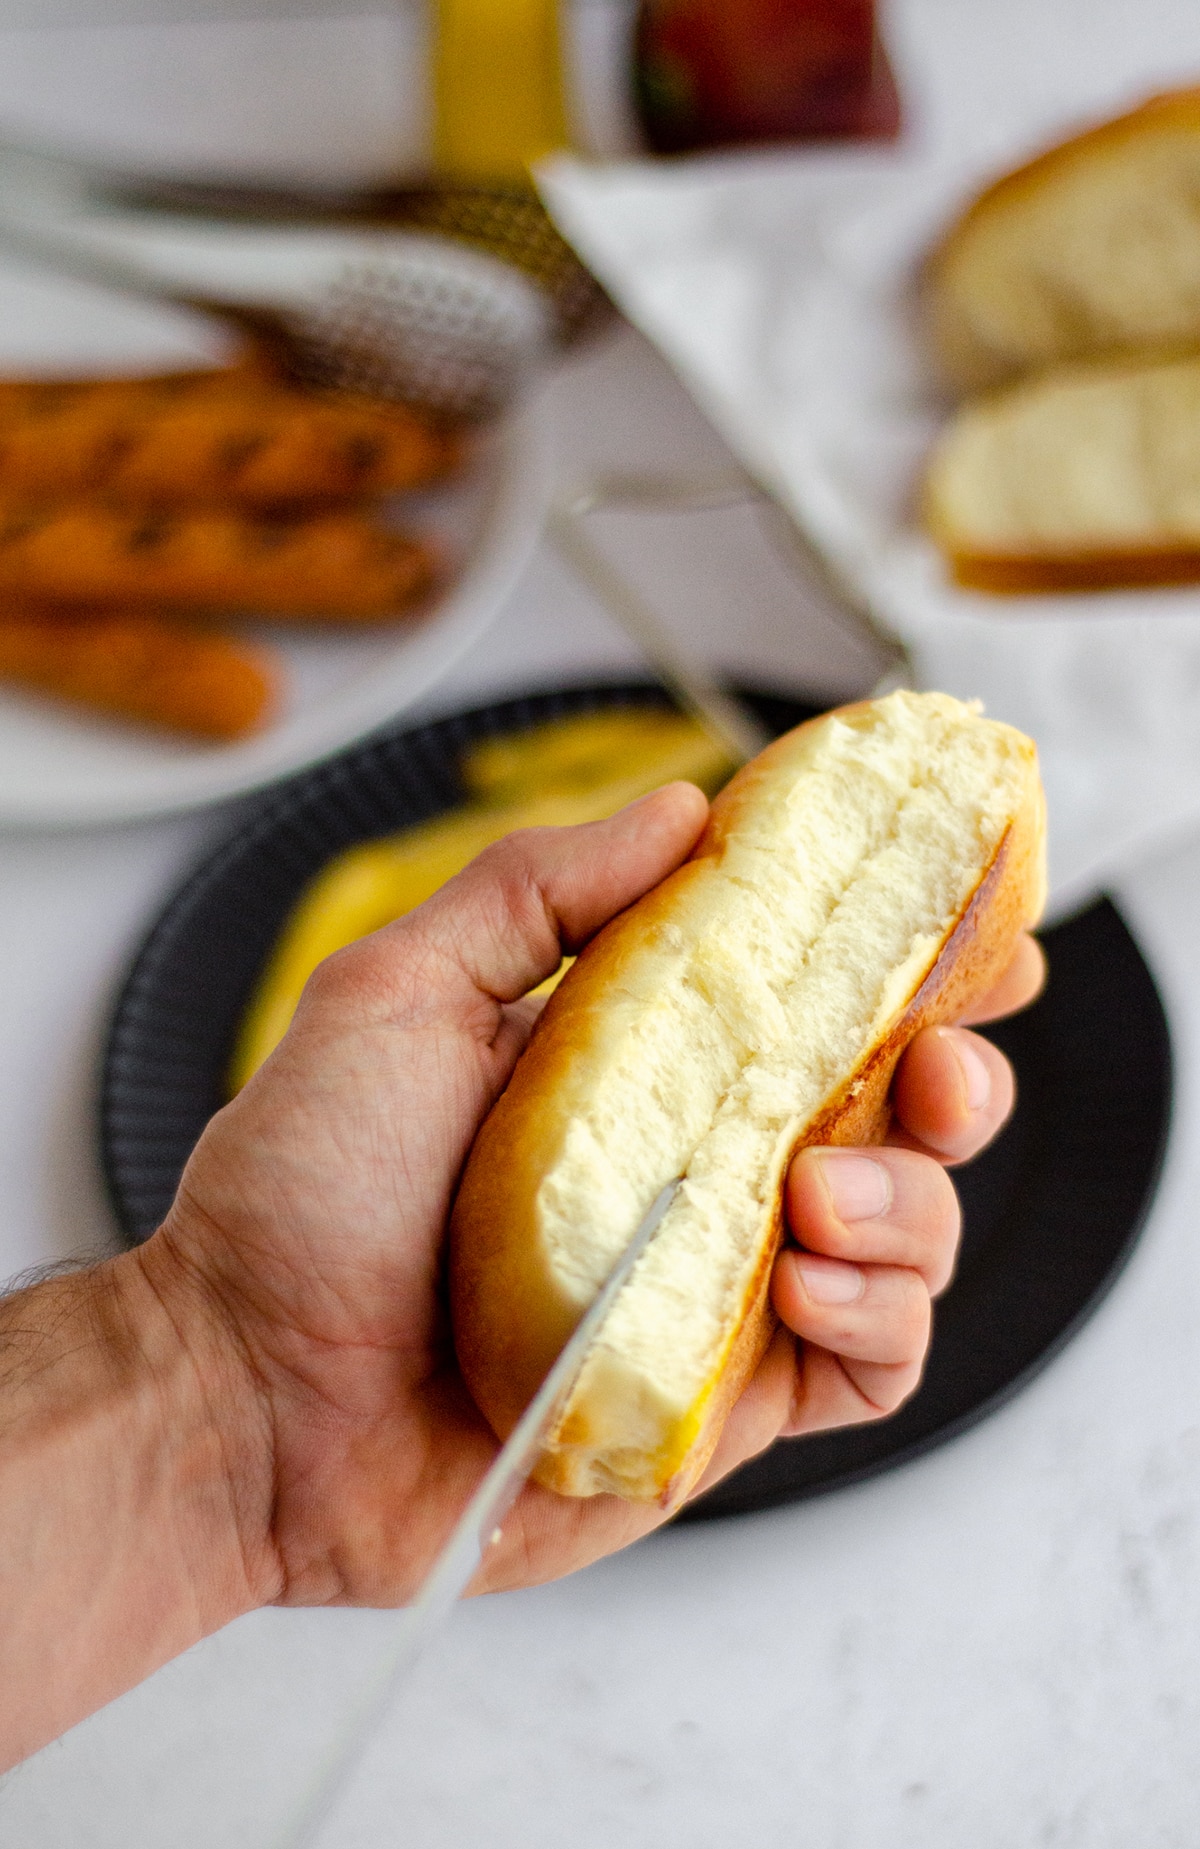 a hand holding a homemade hot dog bun and cutting it open with a knife